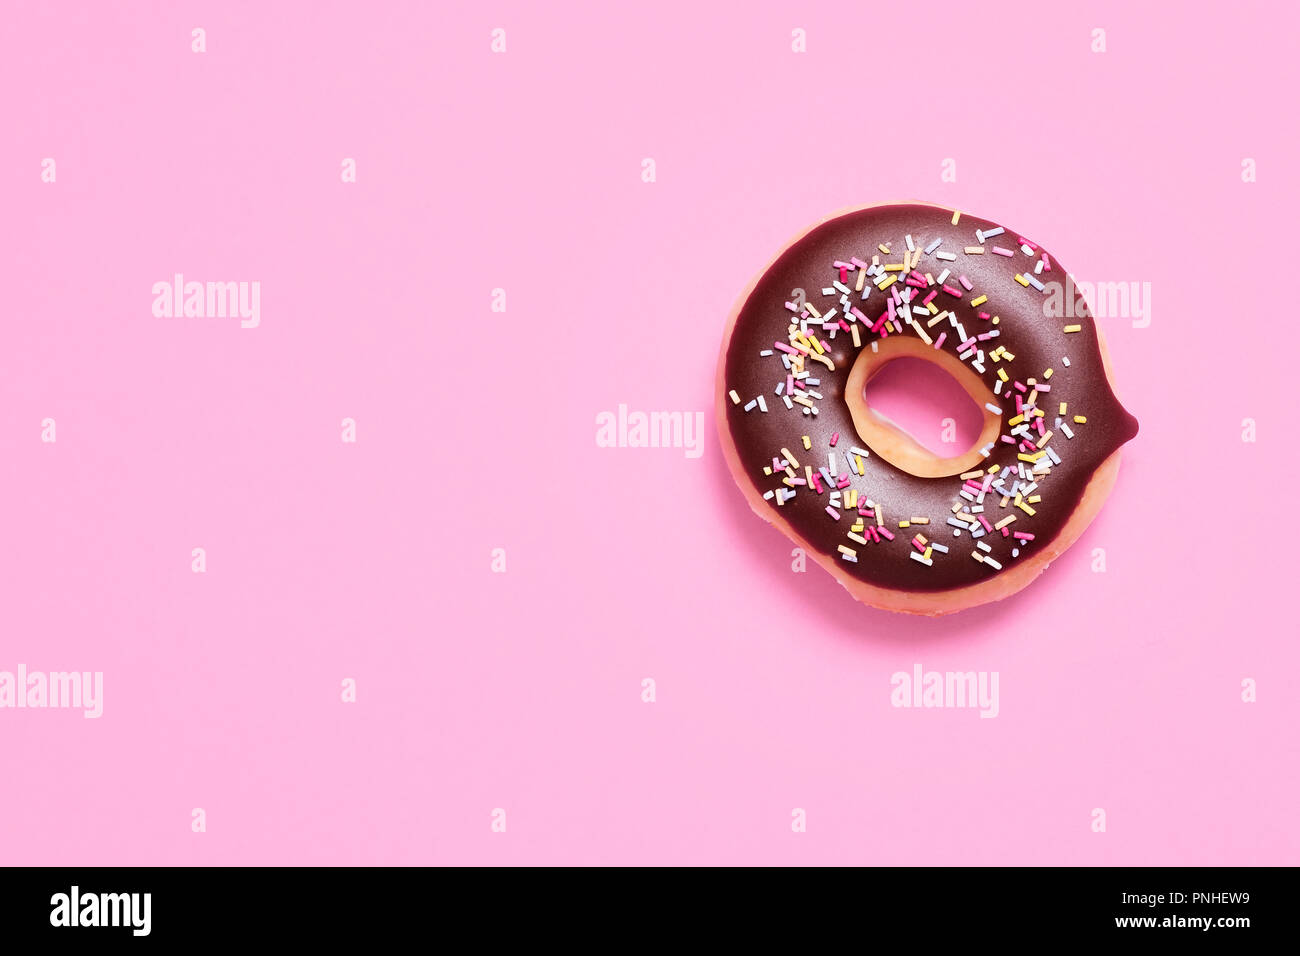 Classic ring donut with chocolate frosting and sprinkles on a pastel pink background with space for copy and text Stock Photo